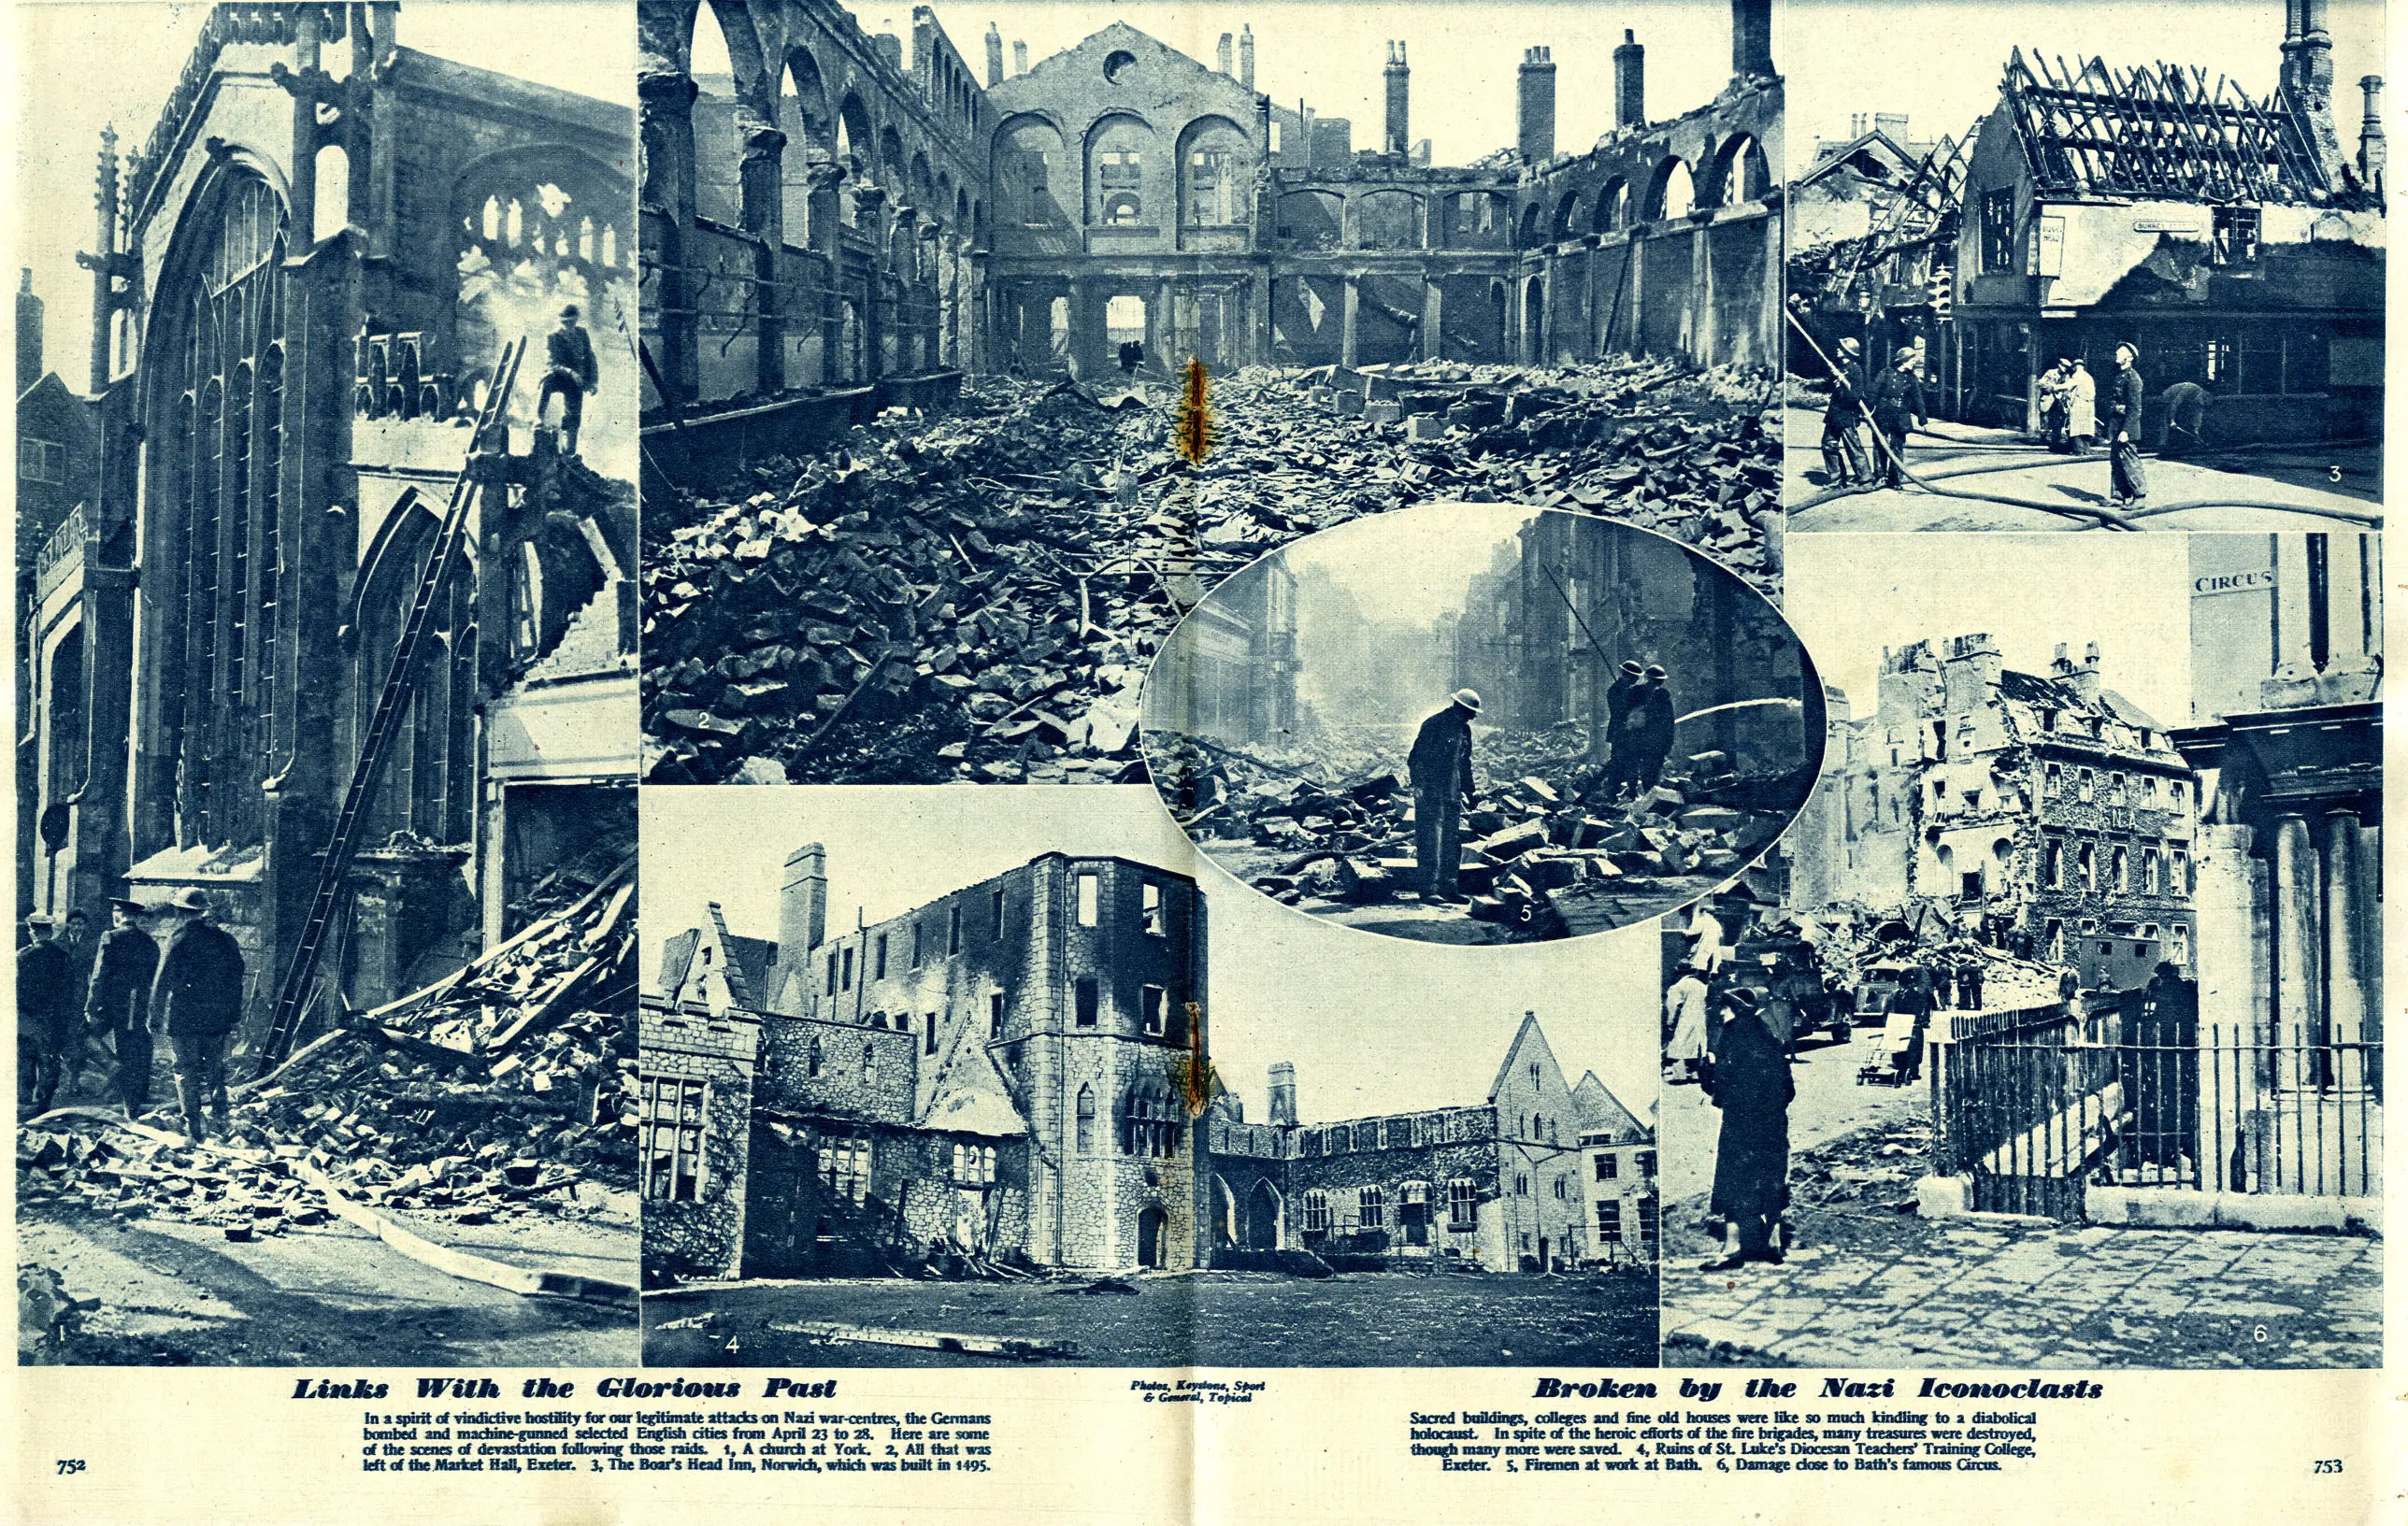 A page of the War Illustrated showing several photos of destruction in Britain. There are huge piles of brick and stone rubble, with firefighters and their hoses and ladders featured in several. Some buildings have no roofs, others have been totally reduced to rubble except for exterior columns.